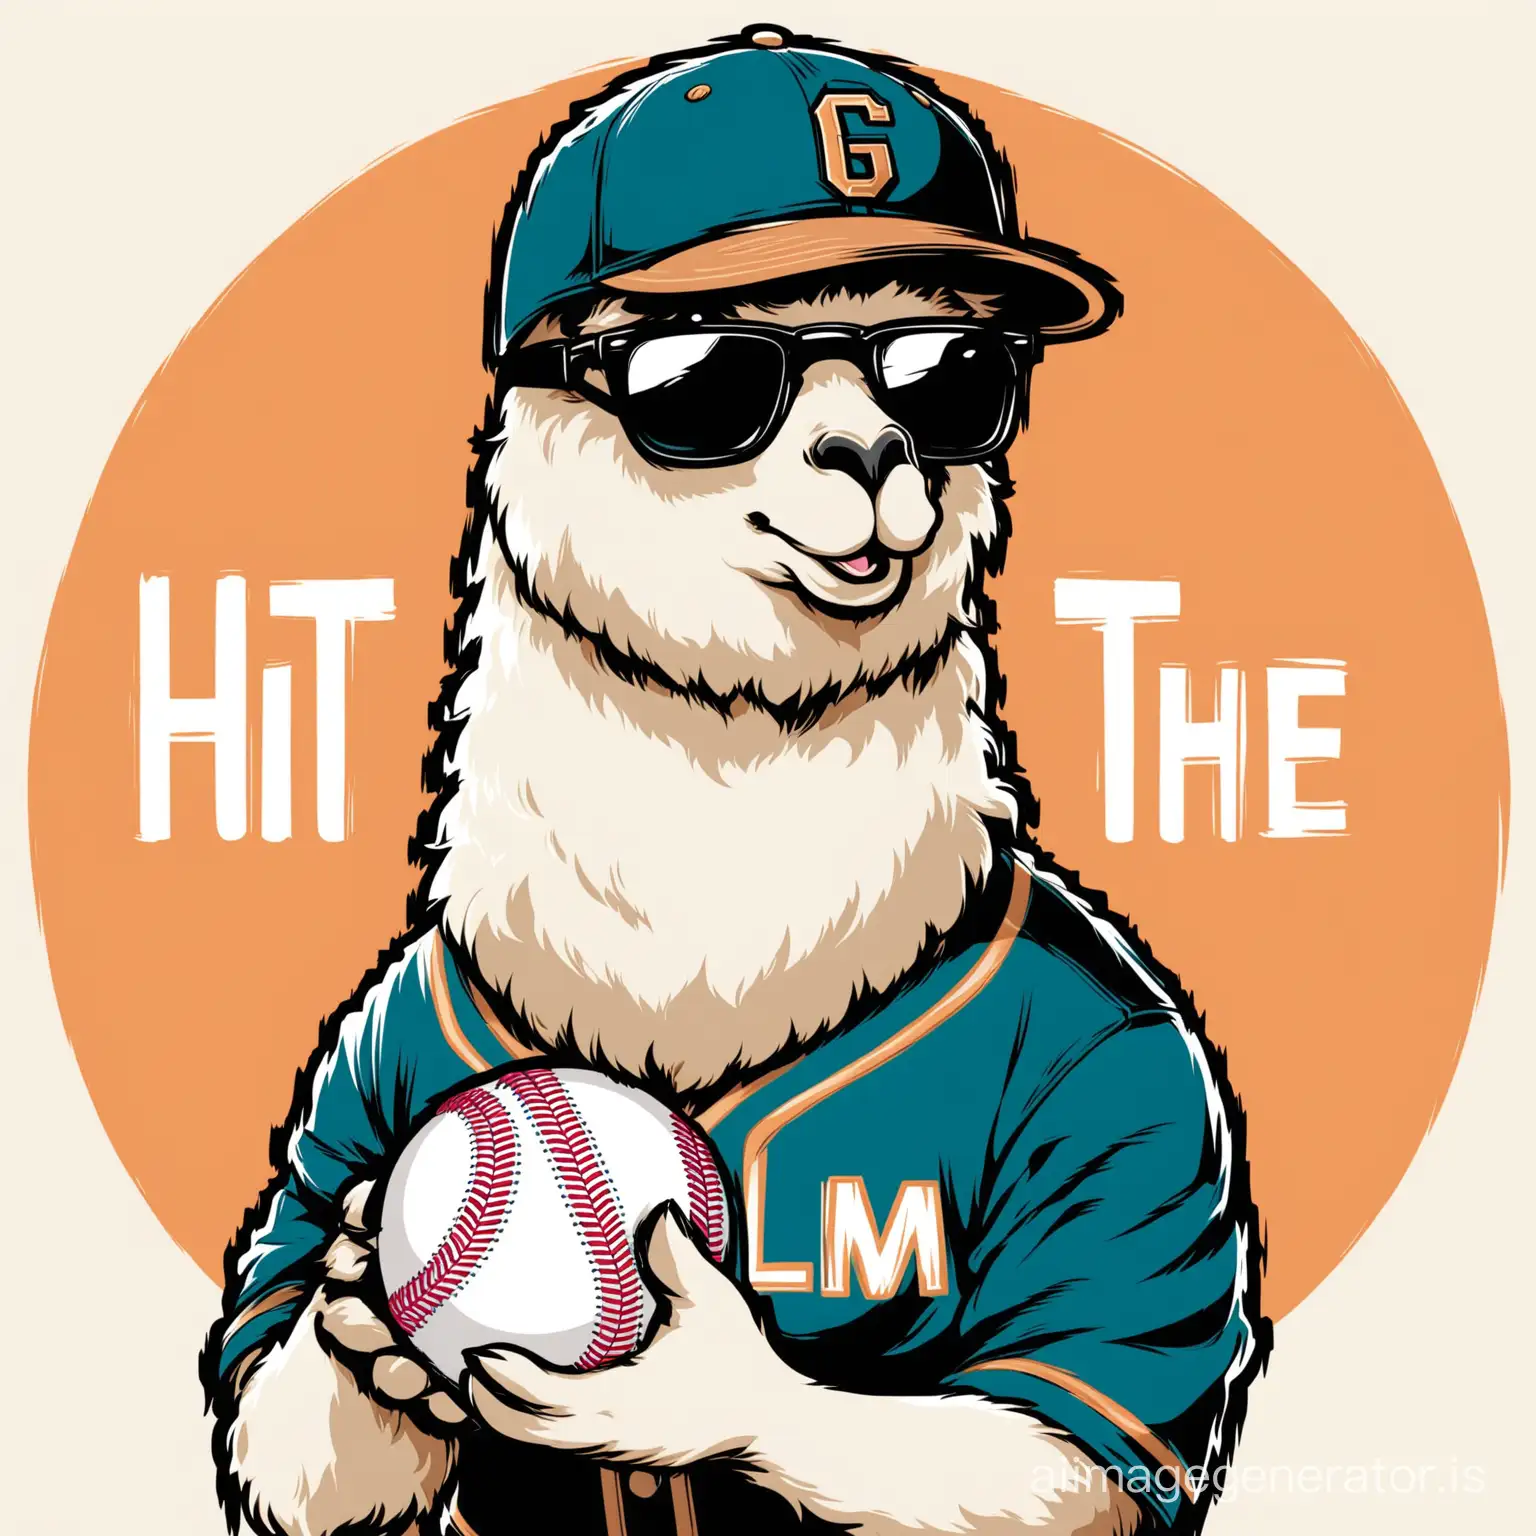 A llama baseball a wearing sunglasses and a baseball hat is depicted, holding a baseball and HIT THE baseball ball. The background is black. vector design. Vintage color WITHOUT BACKGROUND